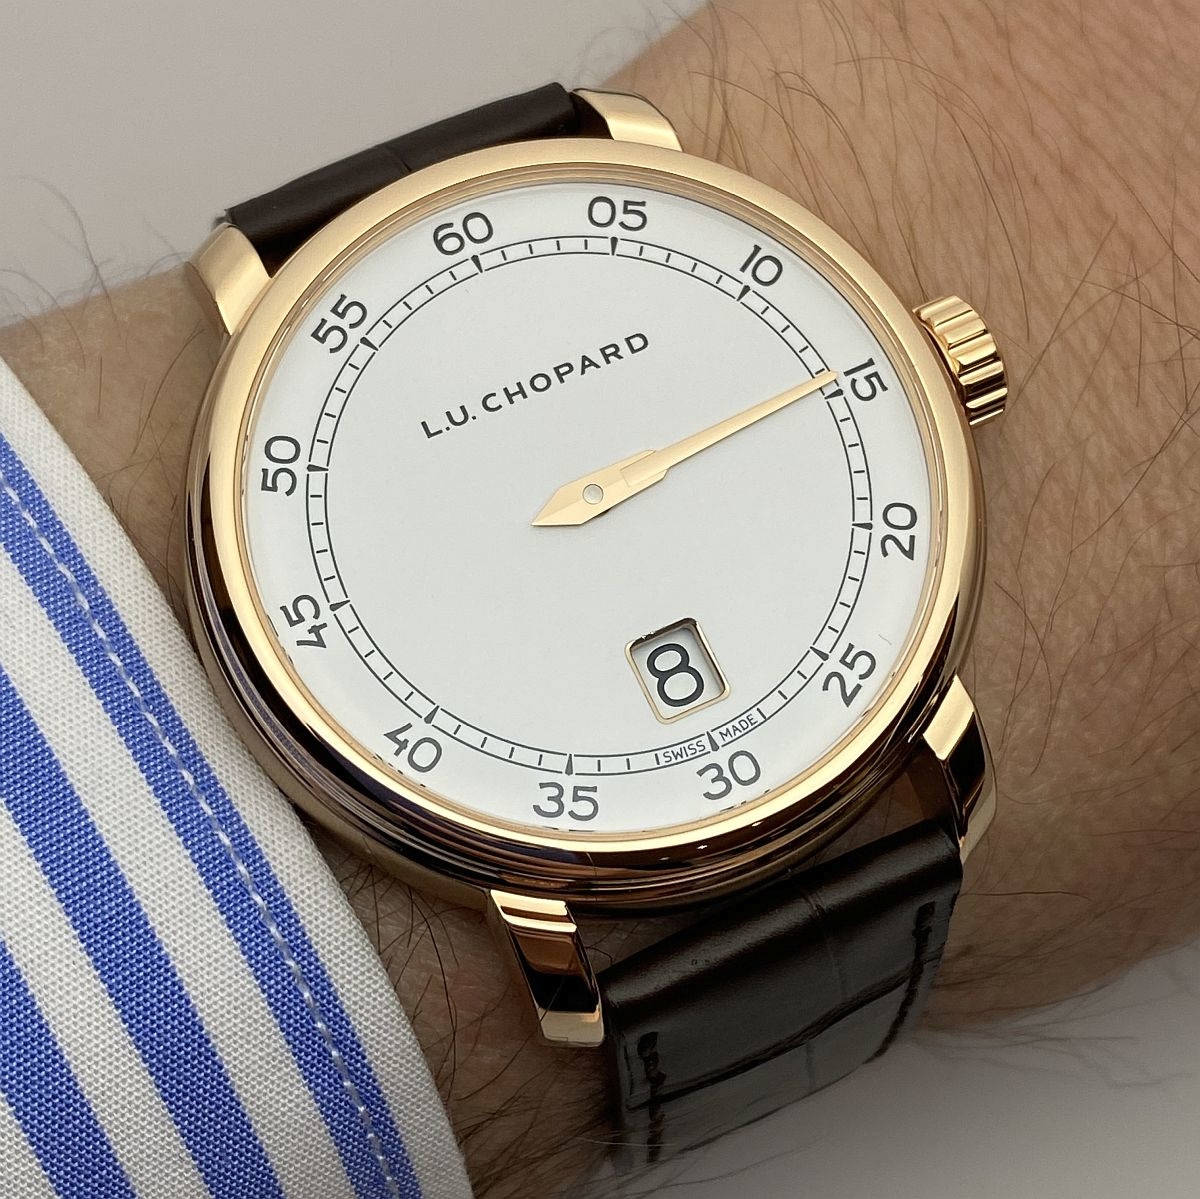 Hands on review of the Chopard LUC Quattro Spirit 25